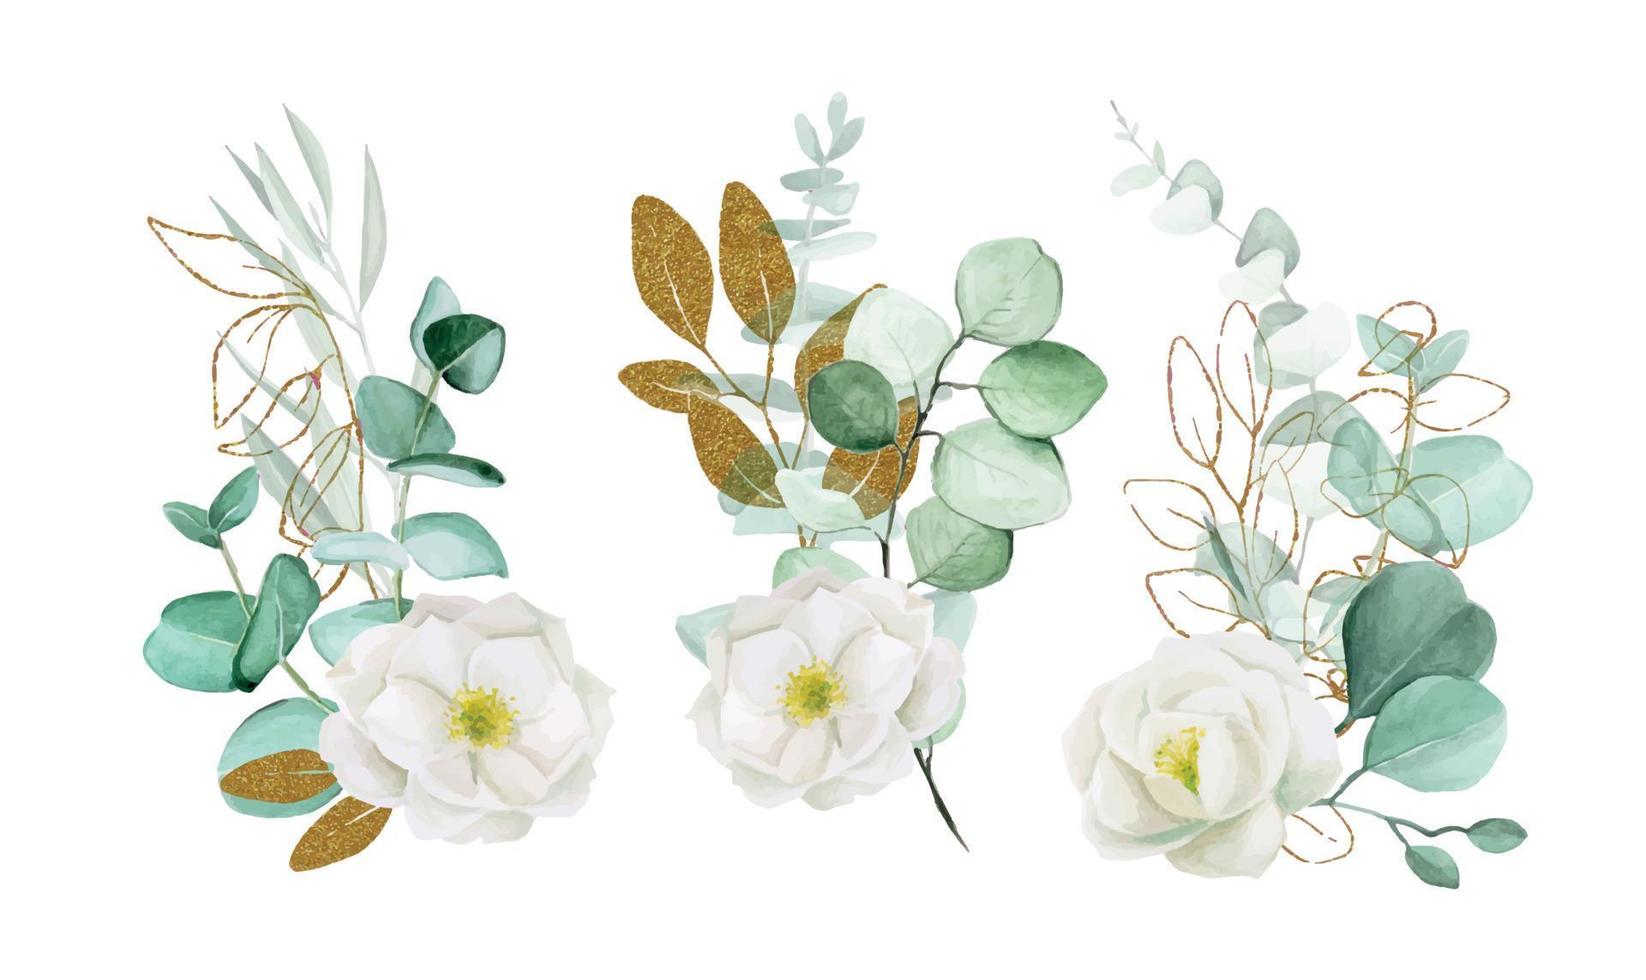 watercolor drawing. A set of bouquets of white flowers and eucalyptus leaves with glitter golden shiny elements. clipart decorations for weddings, cards, invitations. rose hips and eucalyptus leaves vector